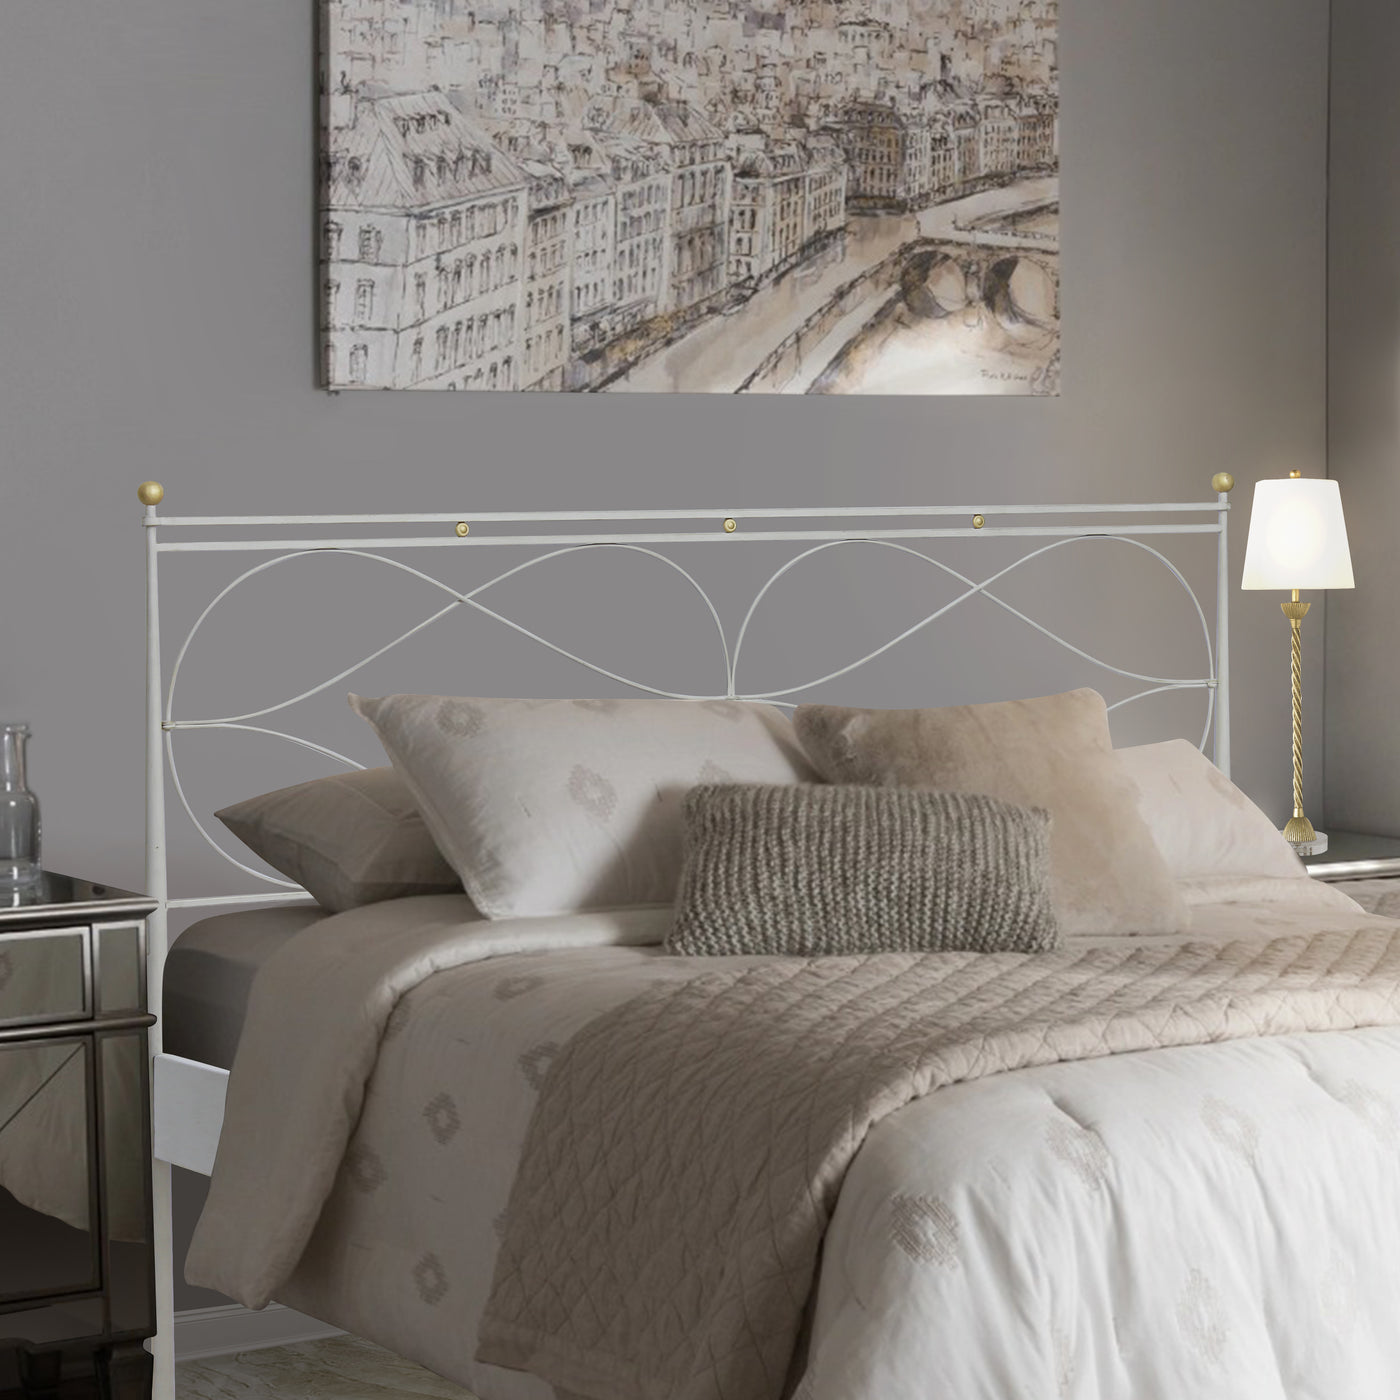 A contemporary wrought iron double bed painted in white and hints of gold, with beige beddings